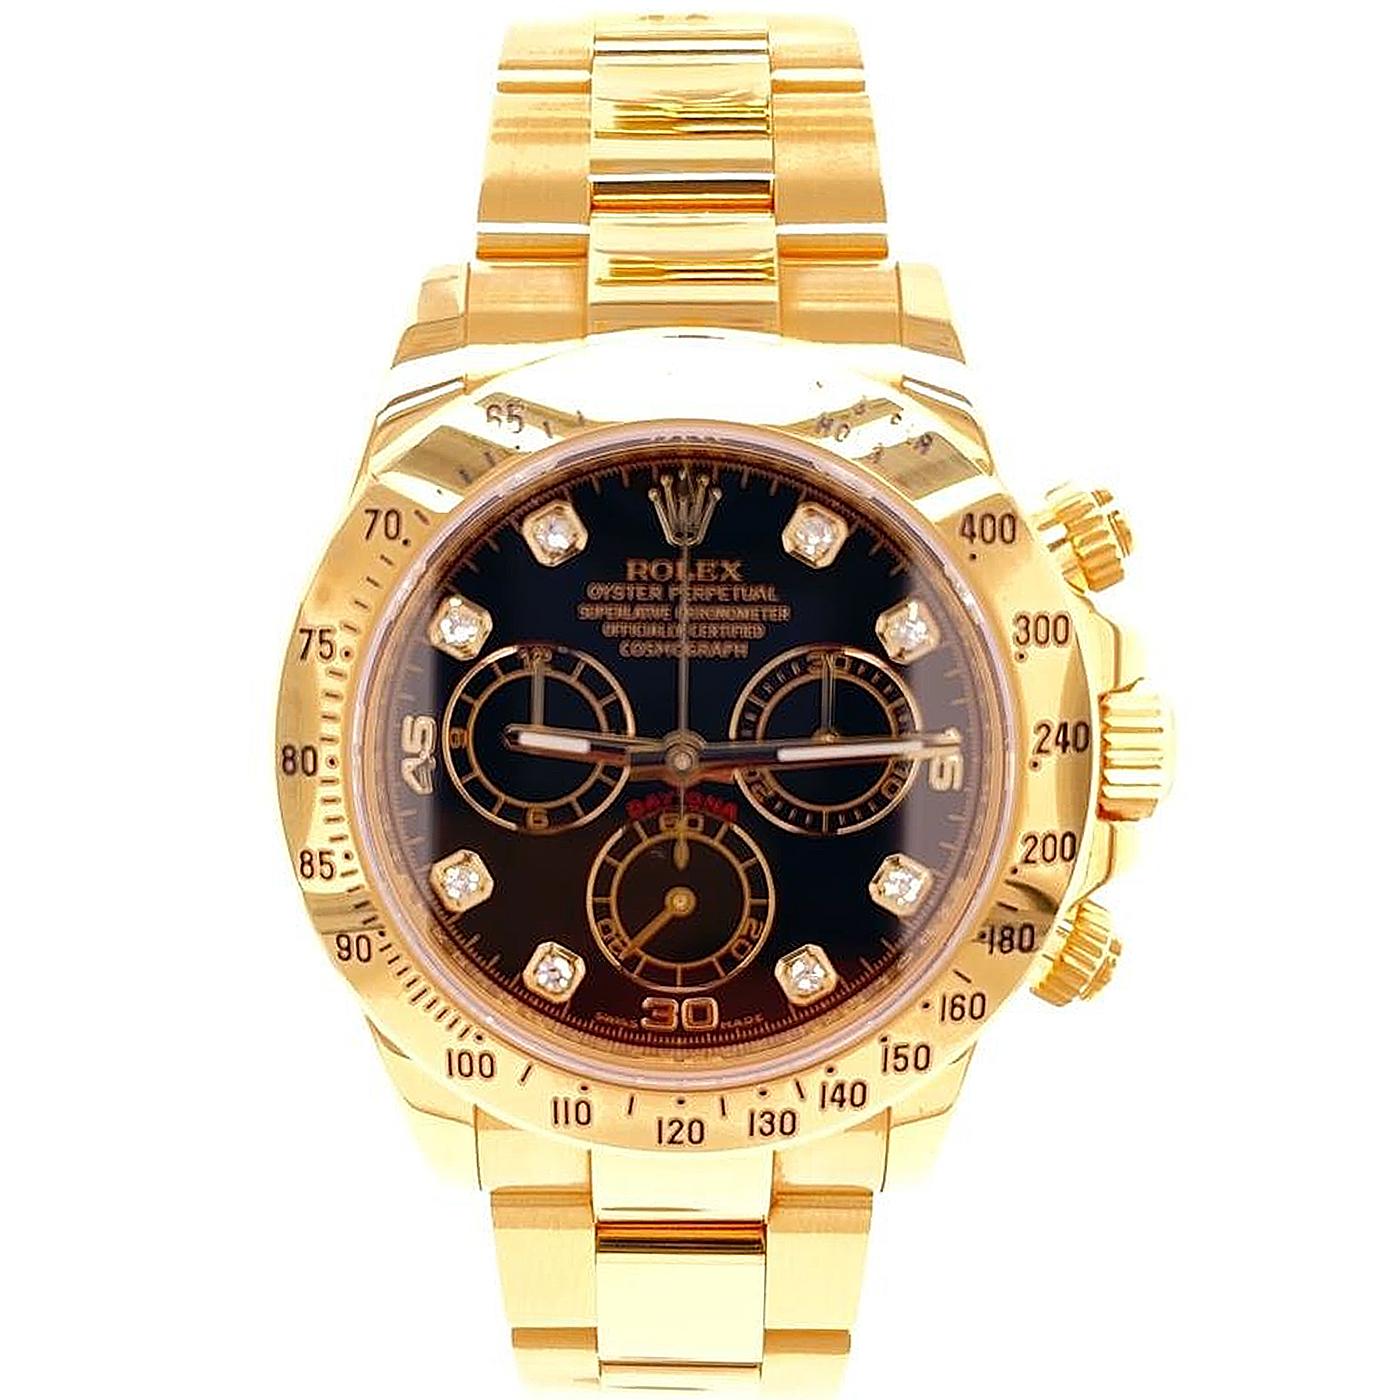 The Rolex Daytona 116528 is the all-gold variation of the Cosmograph Daytona. The particular reference that is presented here is in 18 karats yellow gold finish, a 40mm Oyster case with polished lugs, a three-link Oyster bracelet with polished